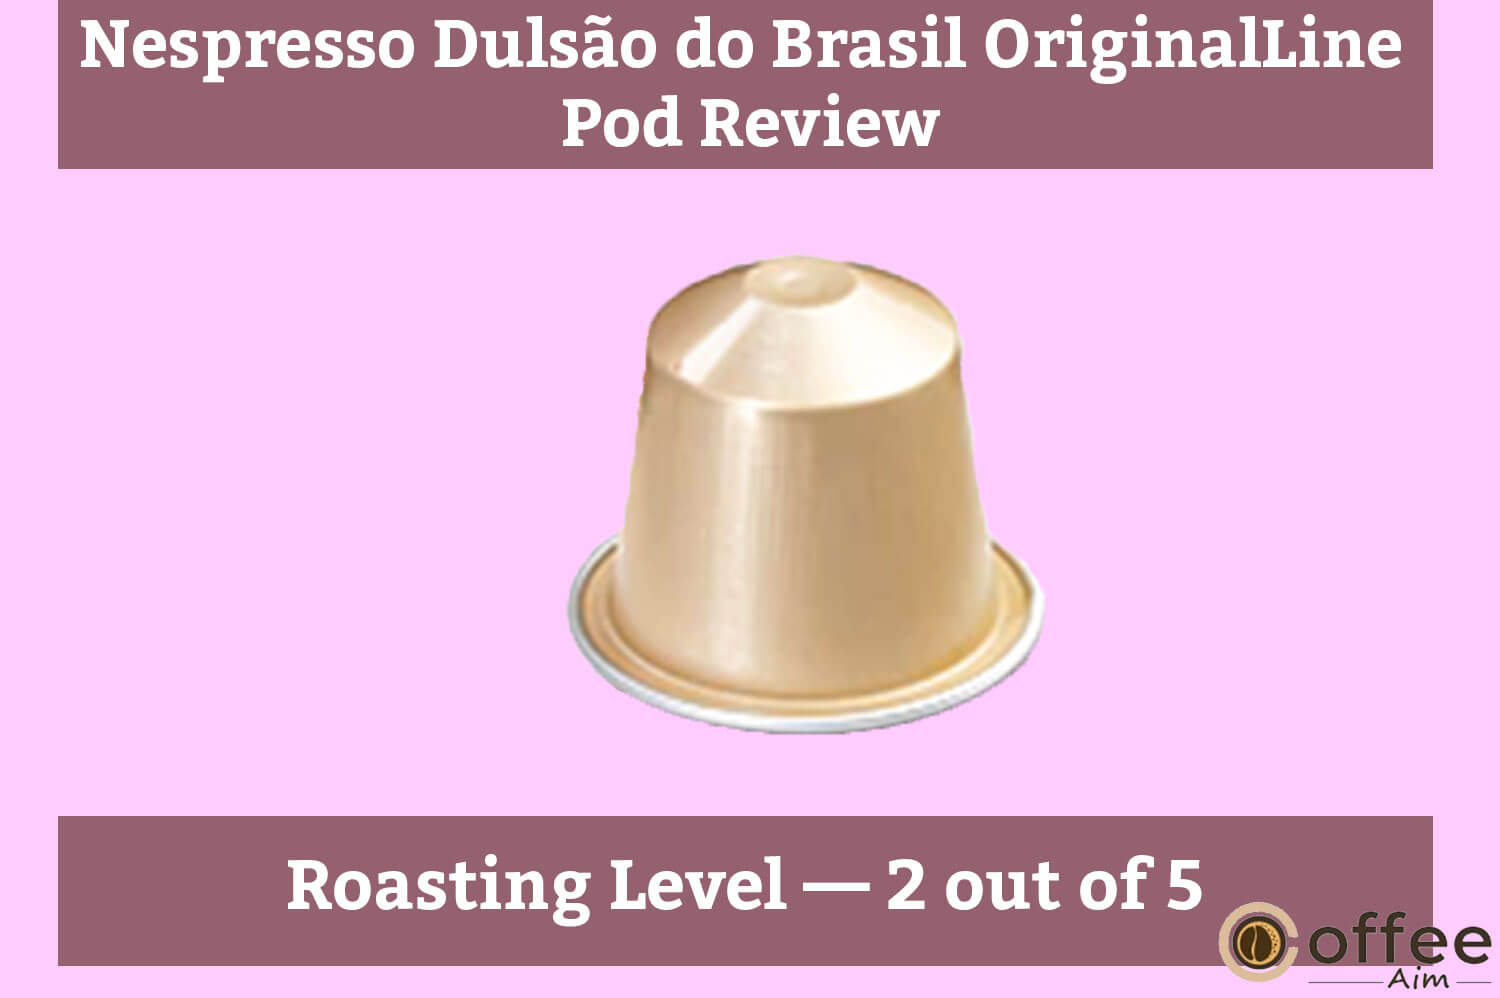 The image depicts the roasting level of "Nespresso Dulsão do Brasil OriginalLine Pod" for the featured article review.